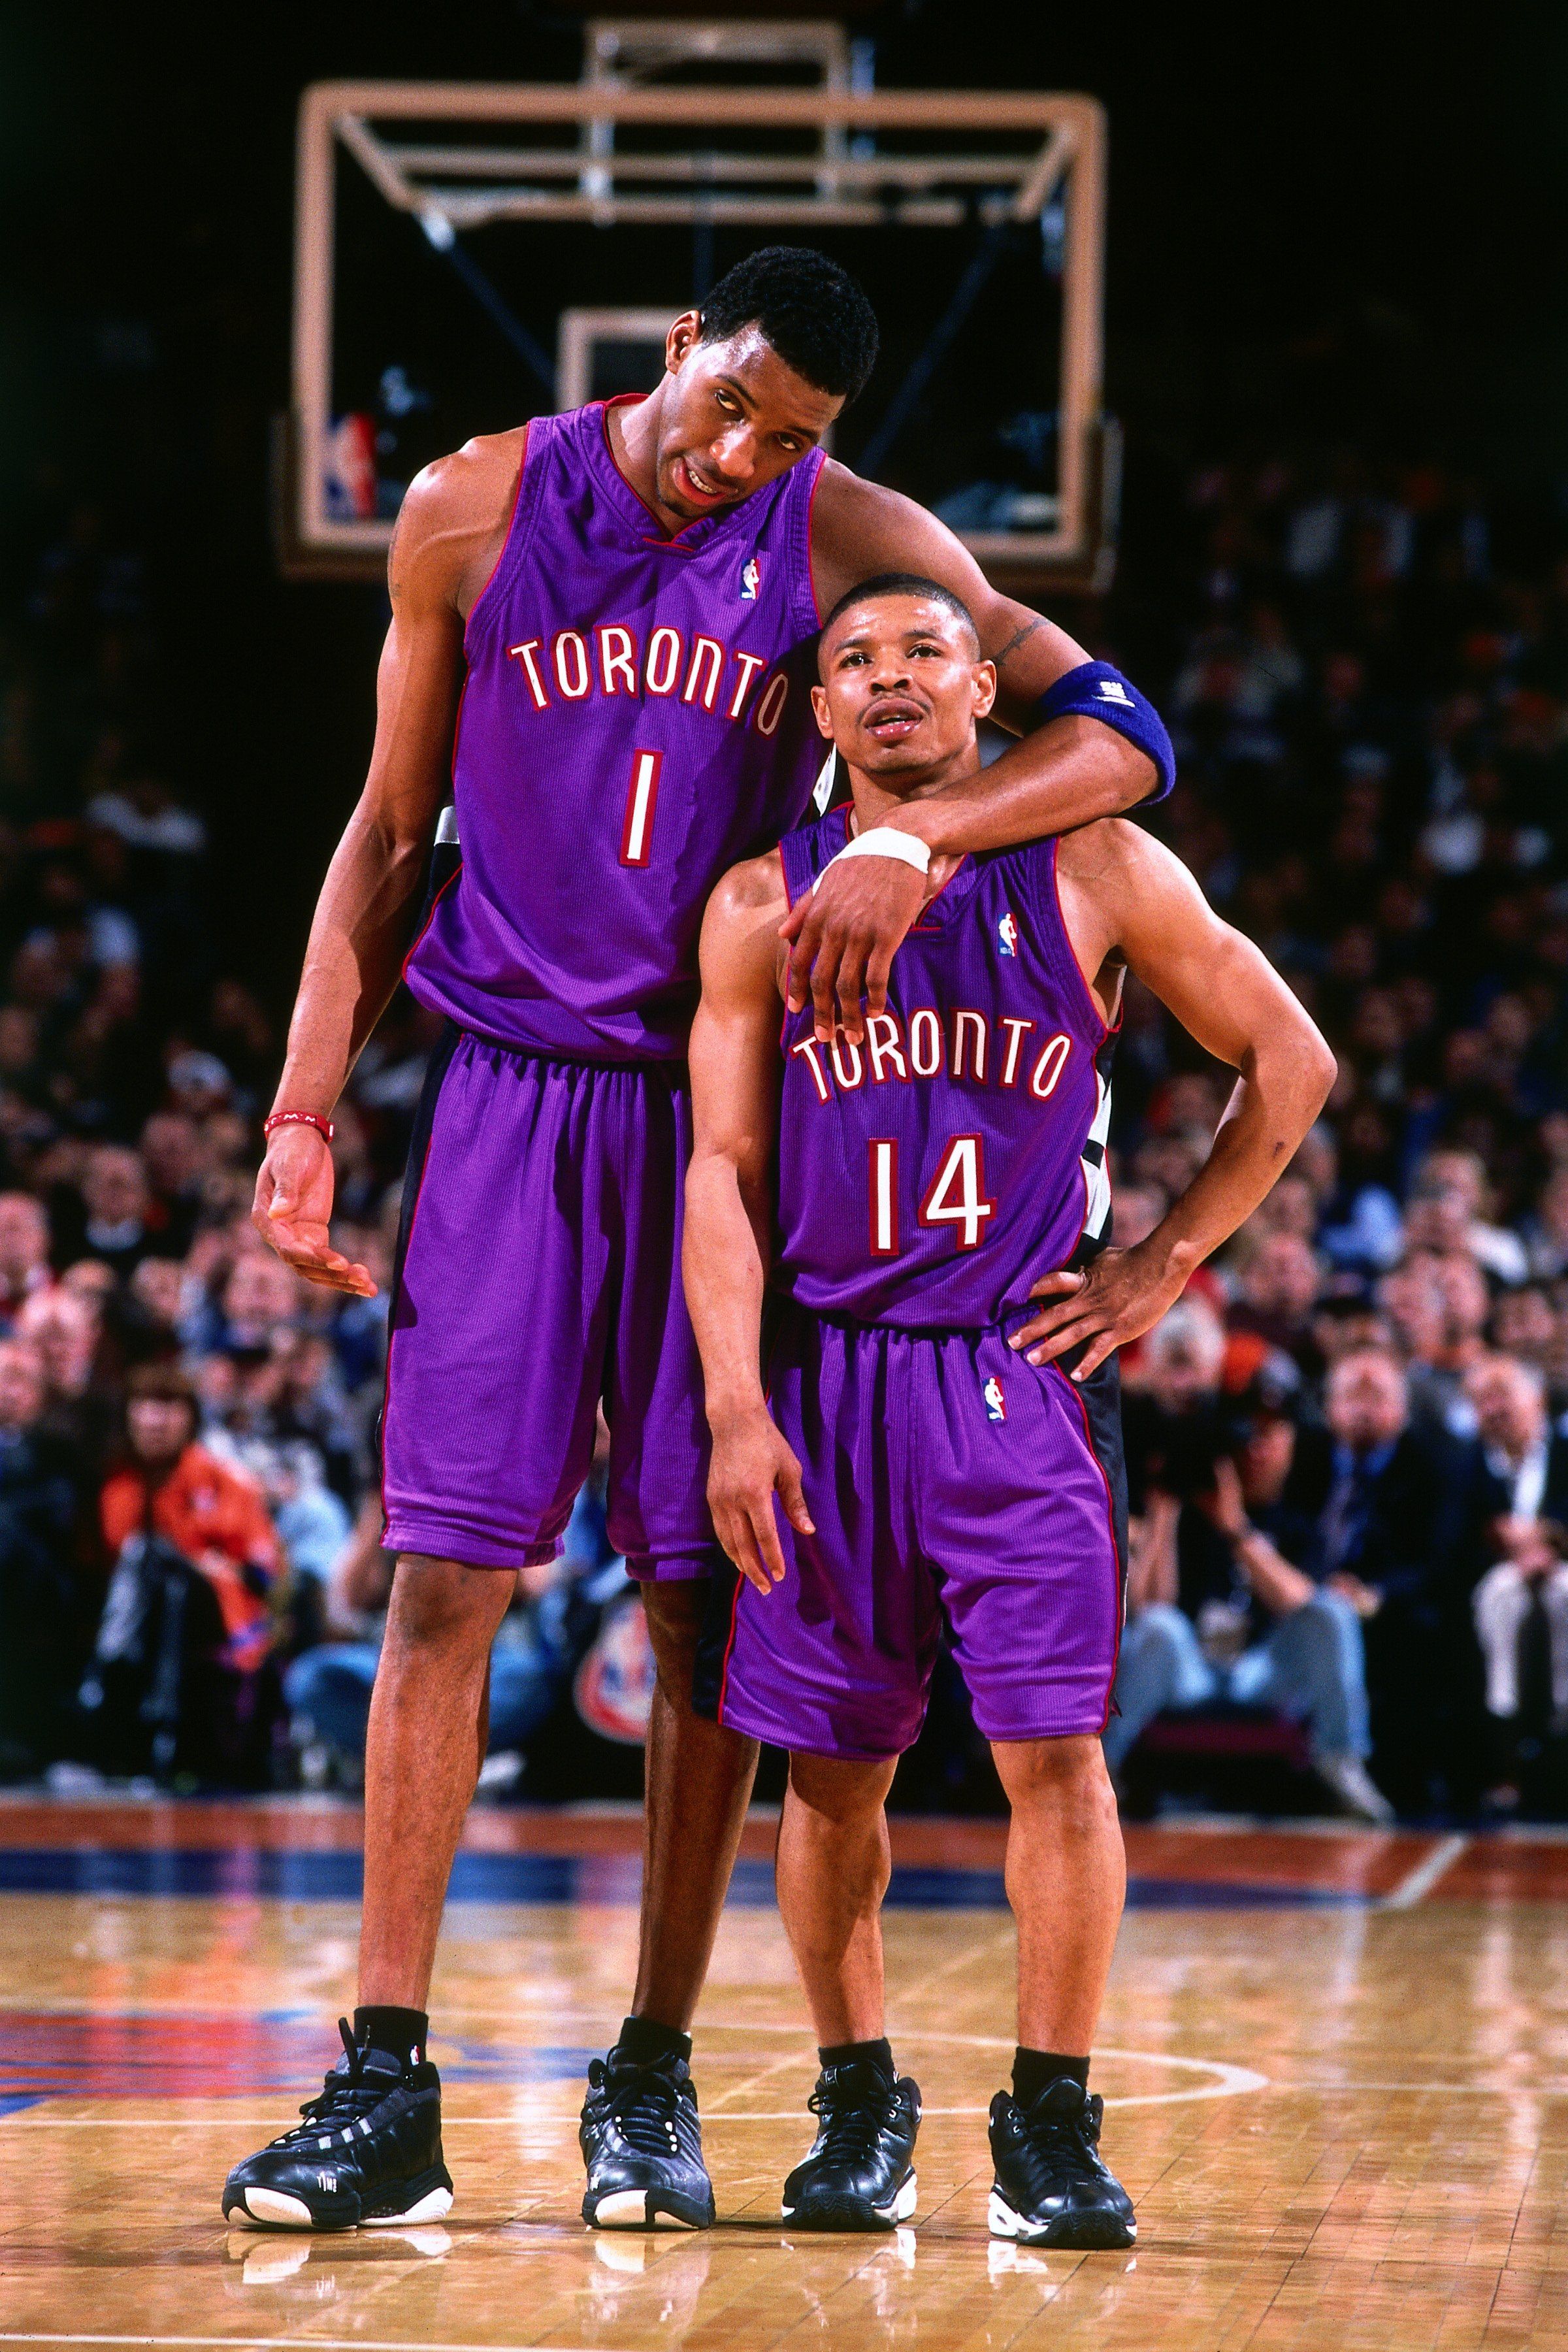 Tracy McGrady and Muggsy Bogues, an unlikely pair! #NBAHumor